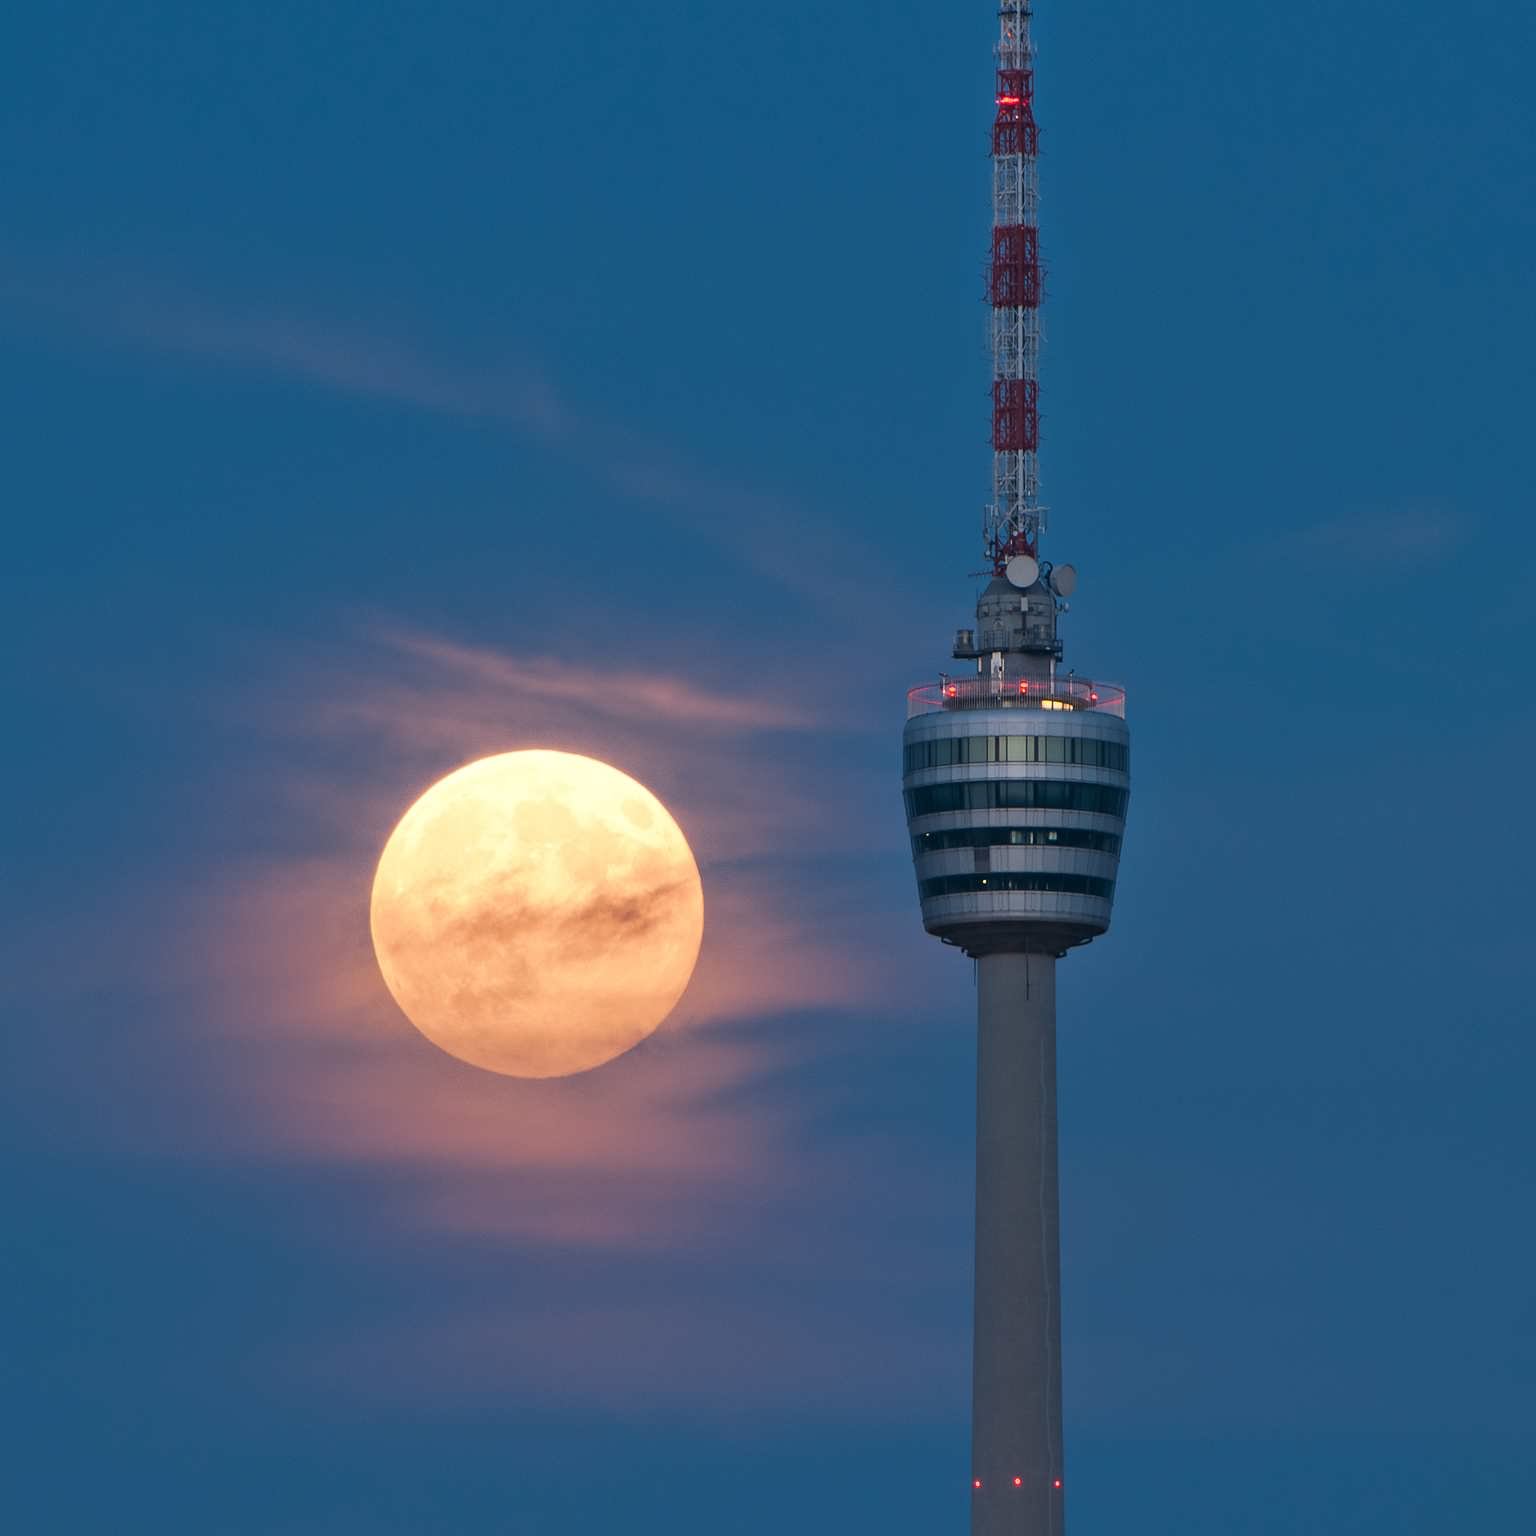 20 Stunning Night Pictures Of The Fernsehturm Tower In Berlin, Germany